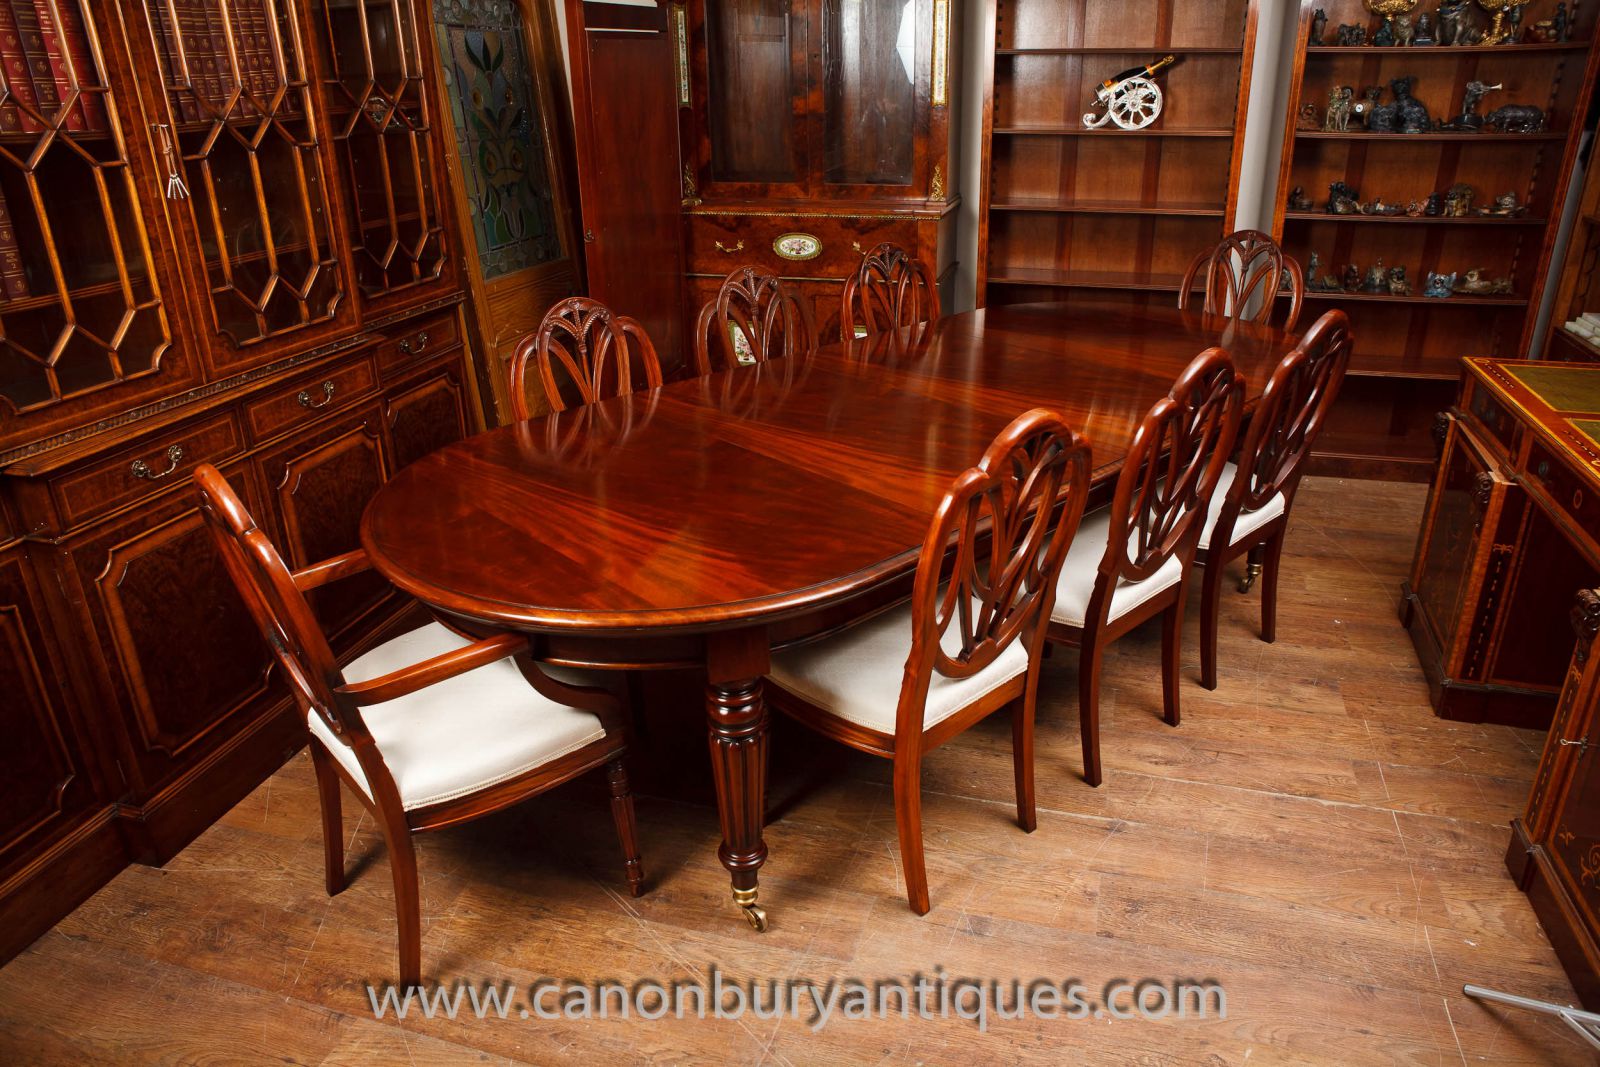 Nice set of Hepplewhite chairs in mahogany around a large Victorian table